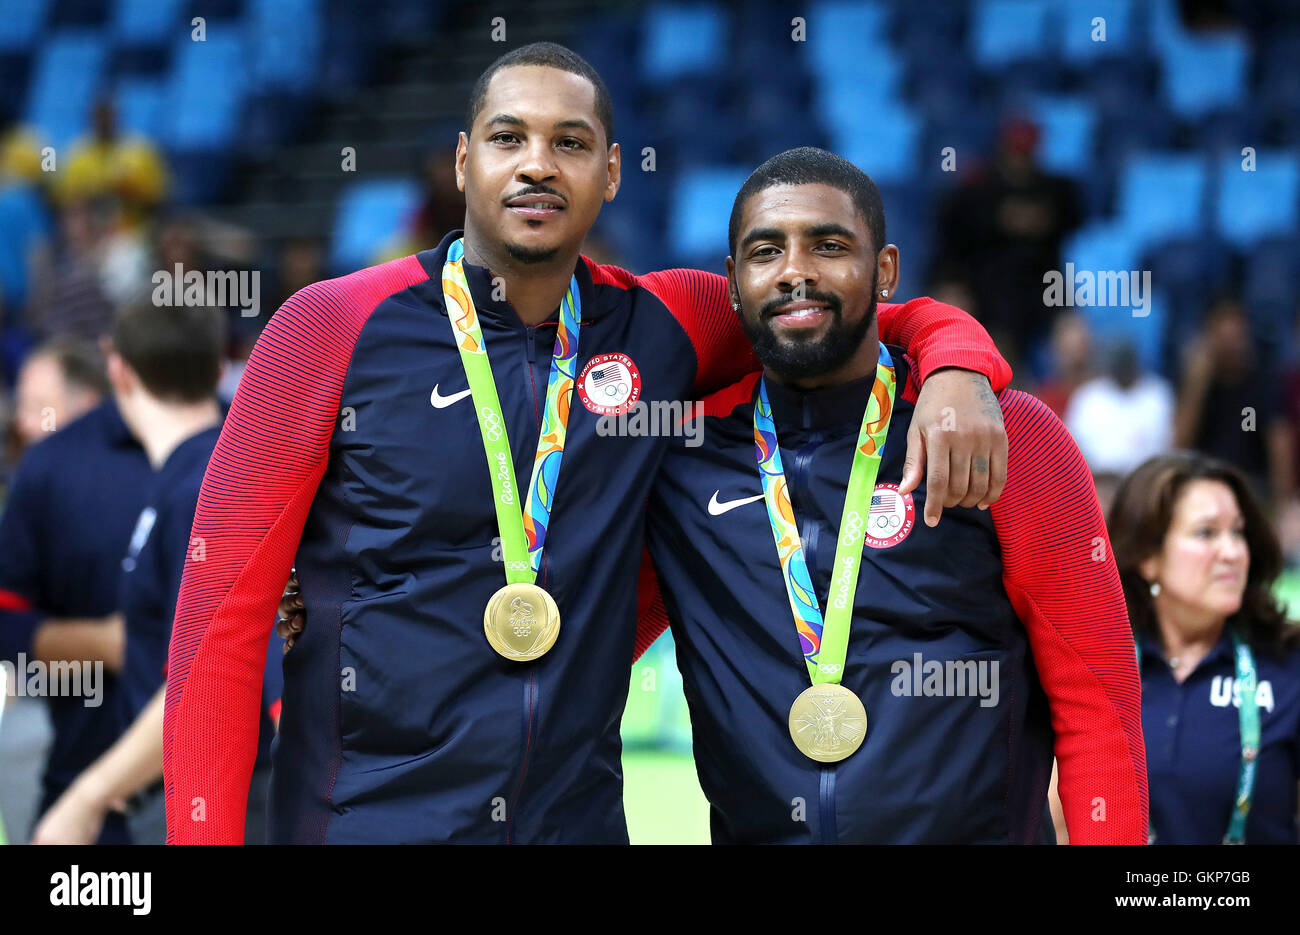 Rio De Janeiro Rj 21 08 16 Rio 16 Olympics Basketball Carmelo Anthony And The United States Irving Kyrie Celebrate The Gold Medal After The Match Between The Usa And Serbia Basketball